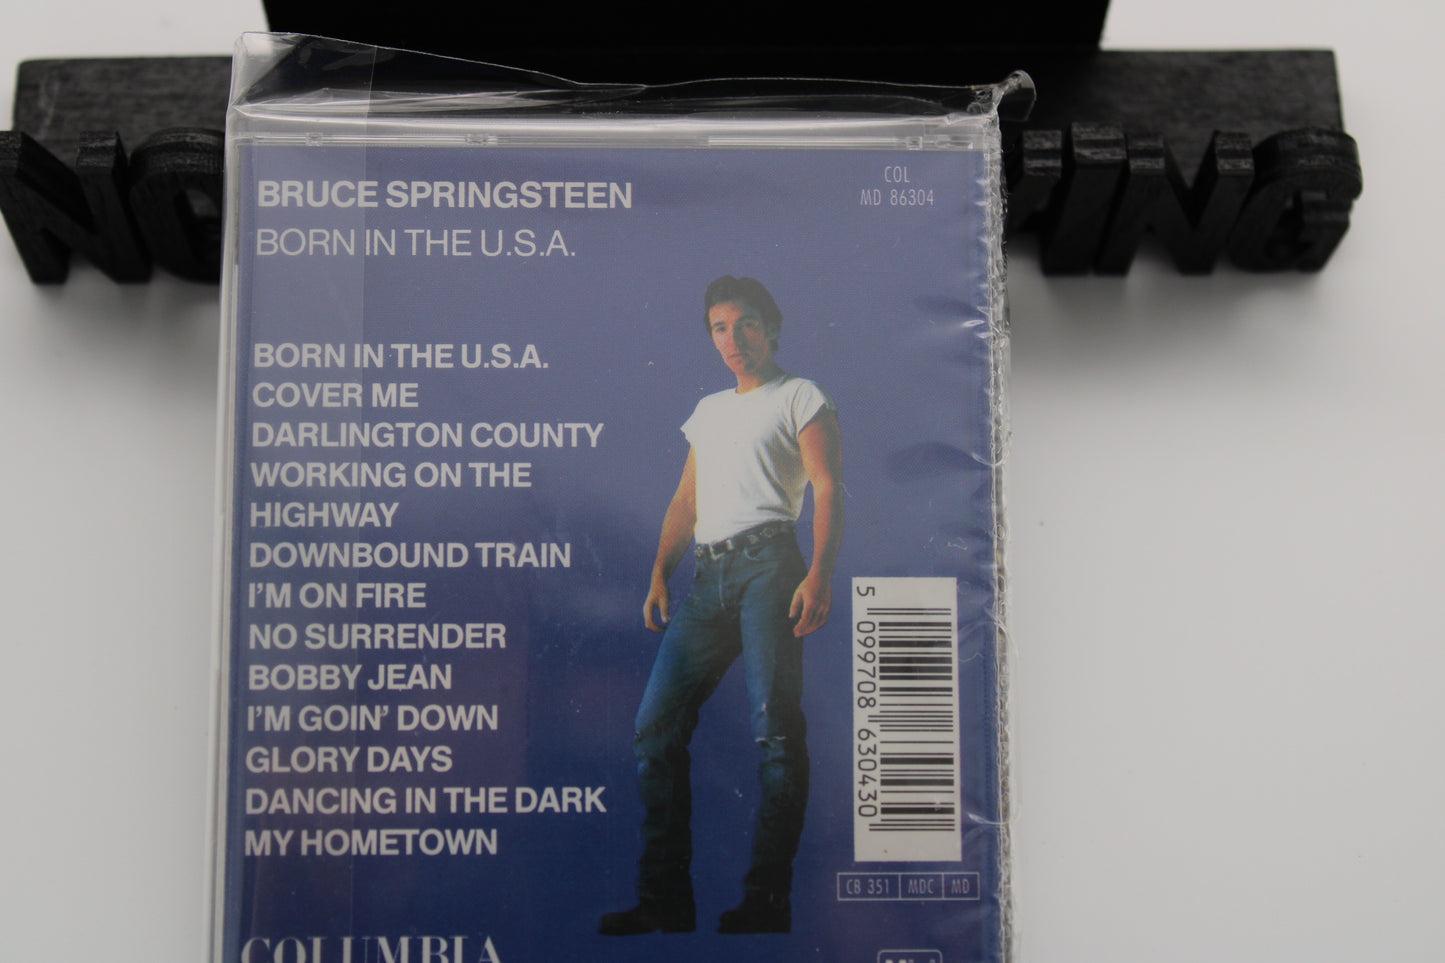 Bruce Springsteen SEALED Born In The USA Original MiniDisc - Very Rare Limited Production and Sealed